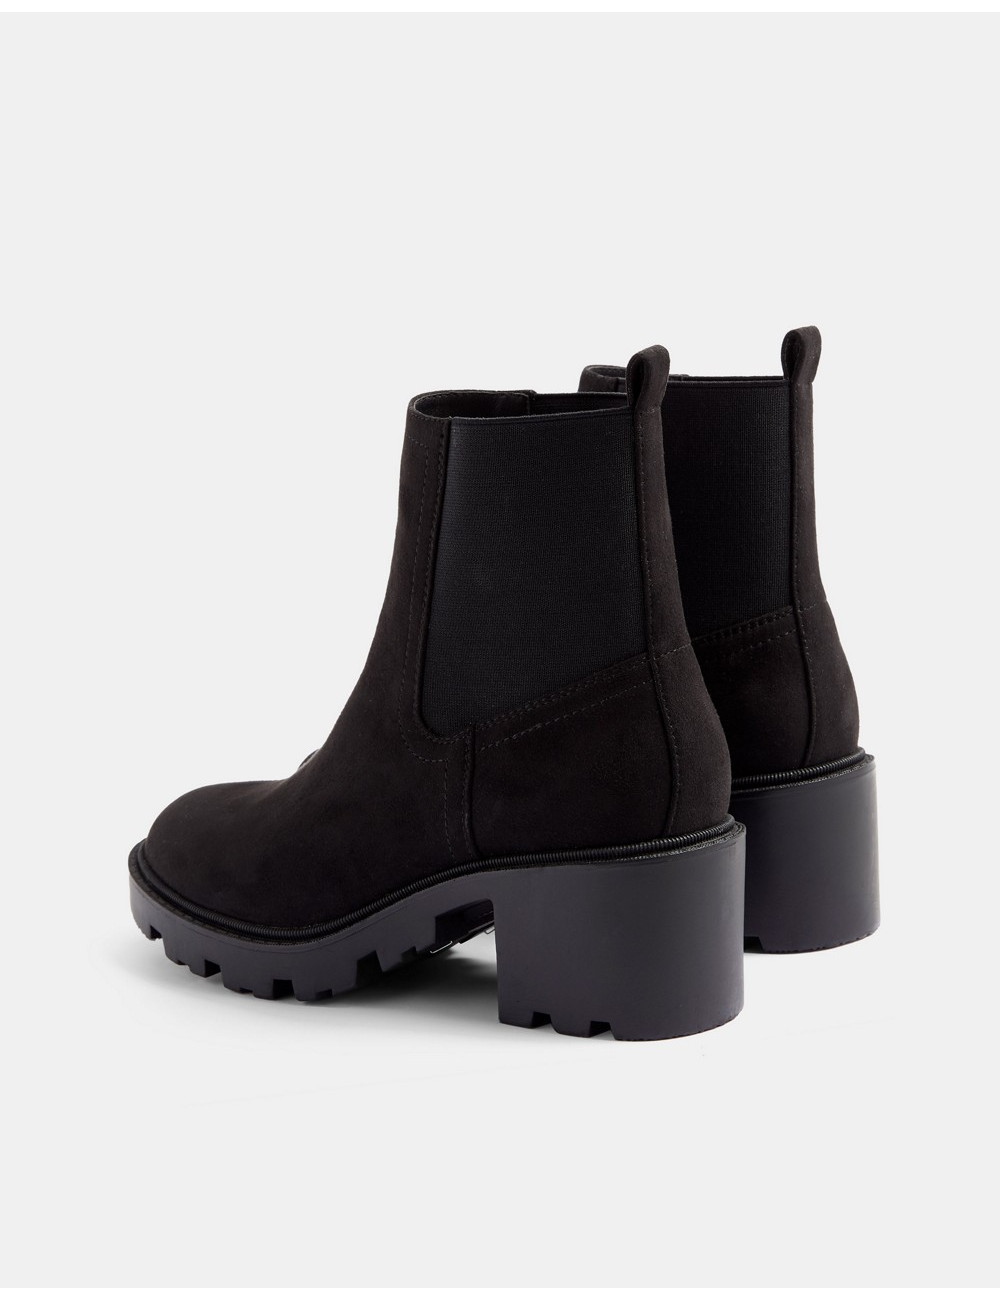 Topshop betsy unit boots in...